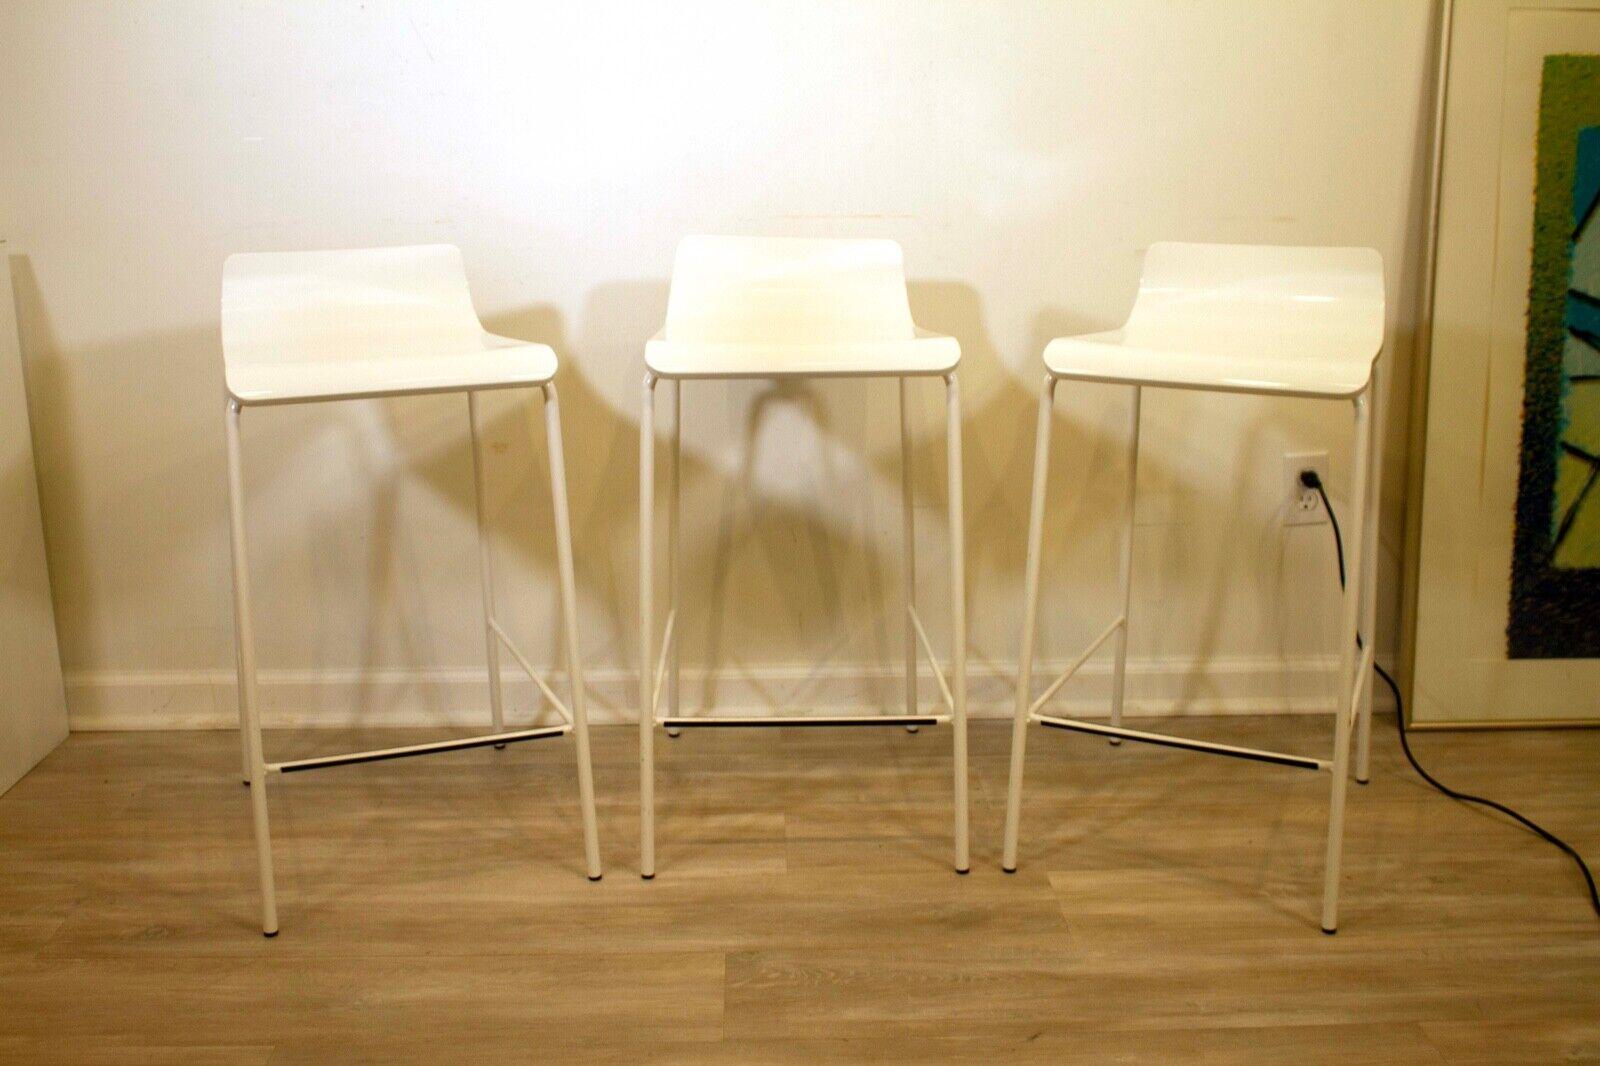 Set of 3x New White Contemporary Modern Bar Stools In Good Condition For Sale In Keego Harbor, MI